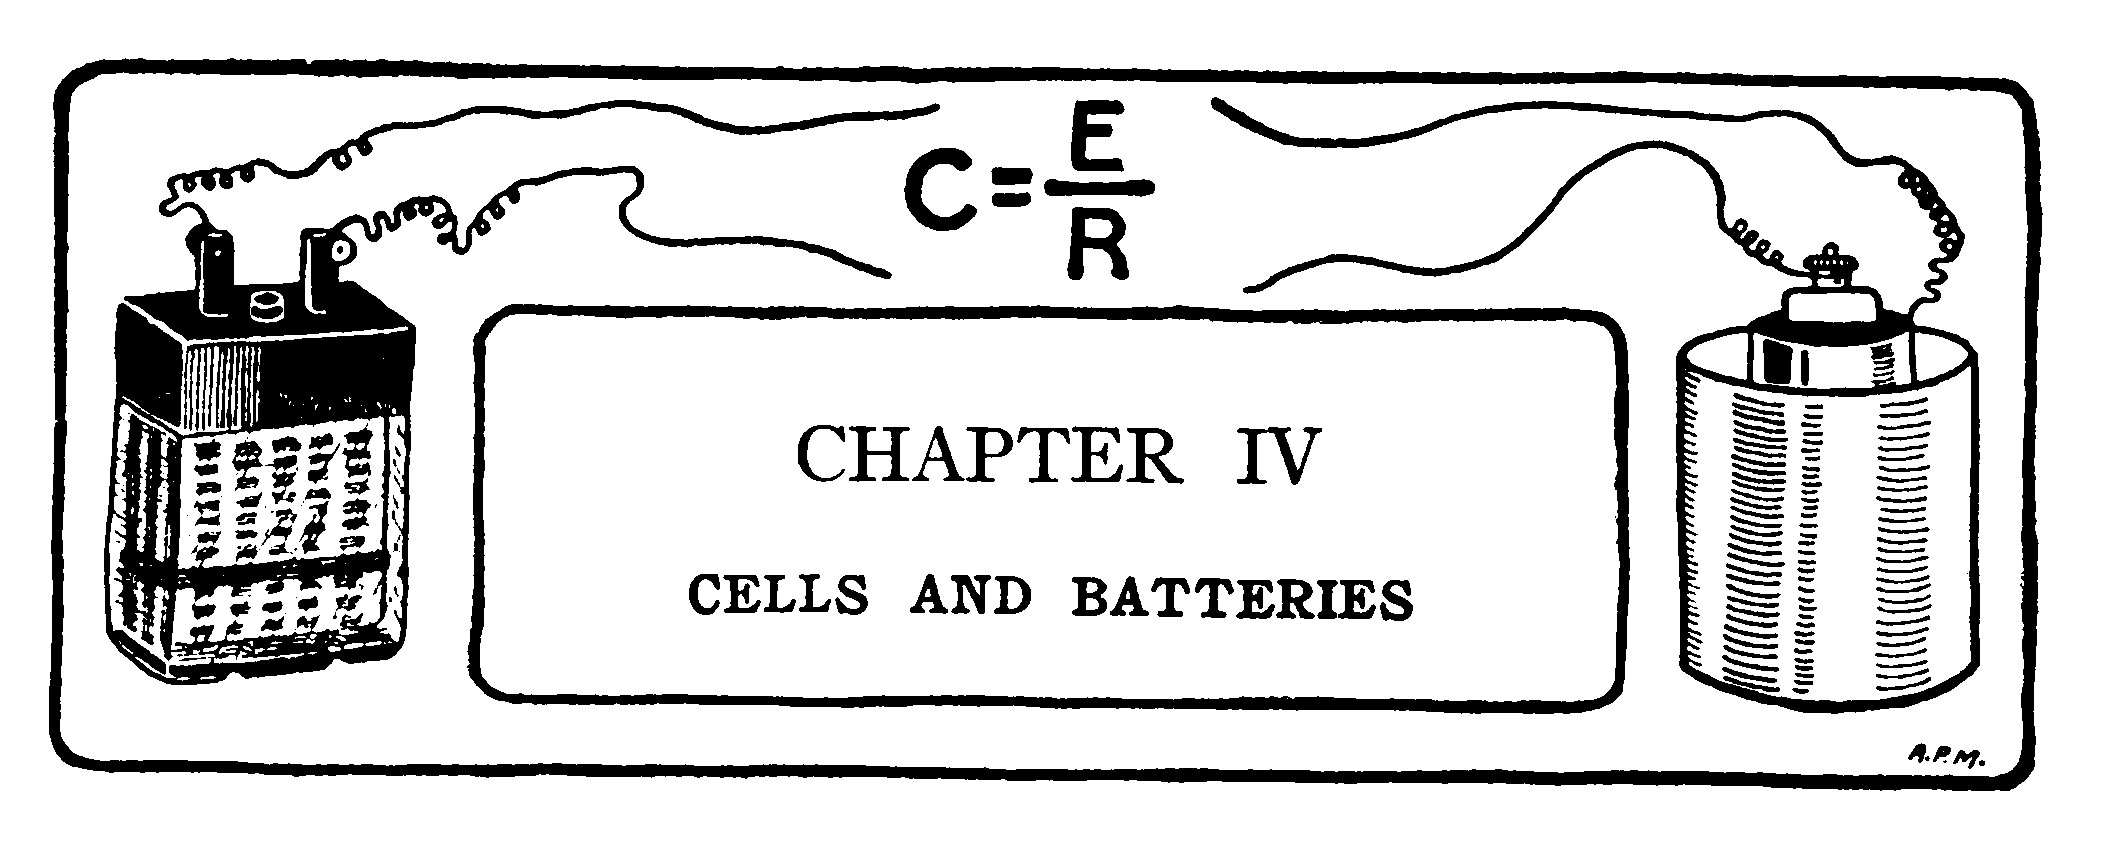 CELLS AND BATTERIES